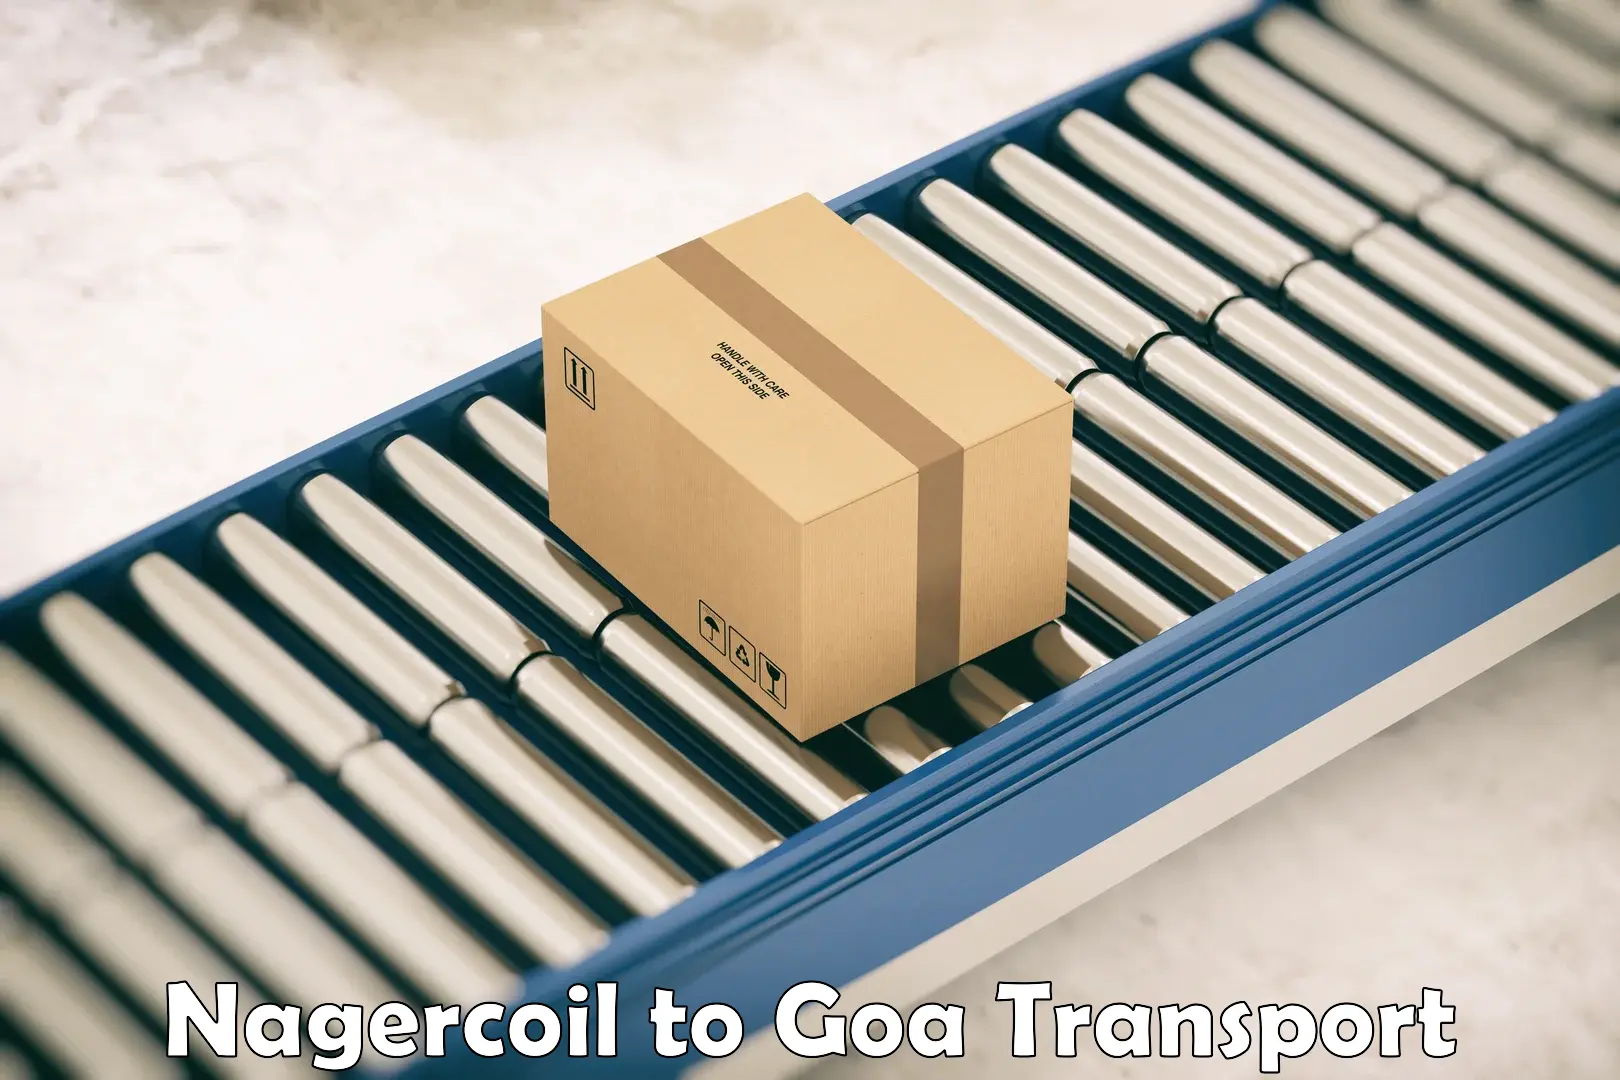 Express transport services Nagercoil to Vasco da Gama